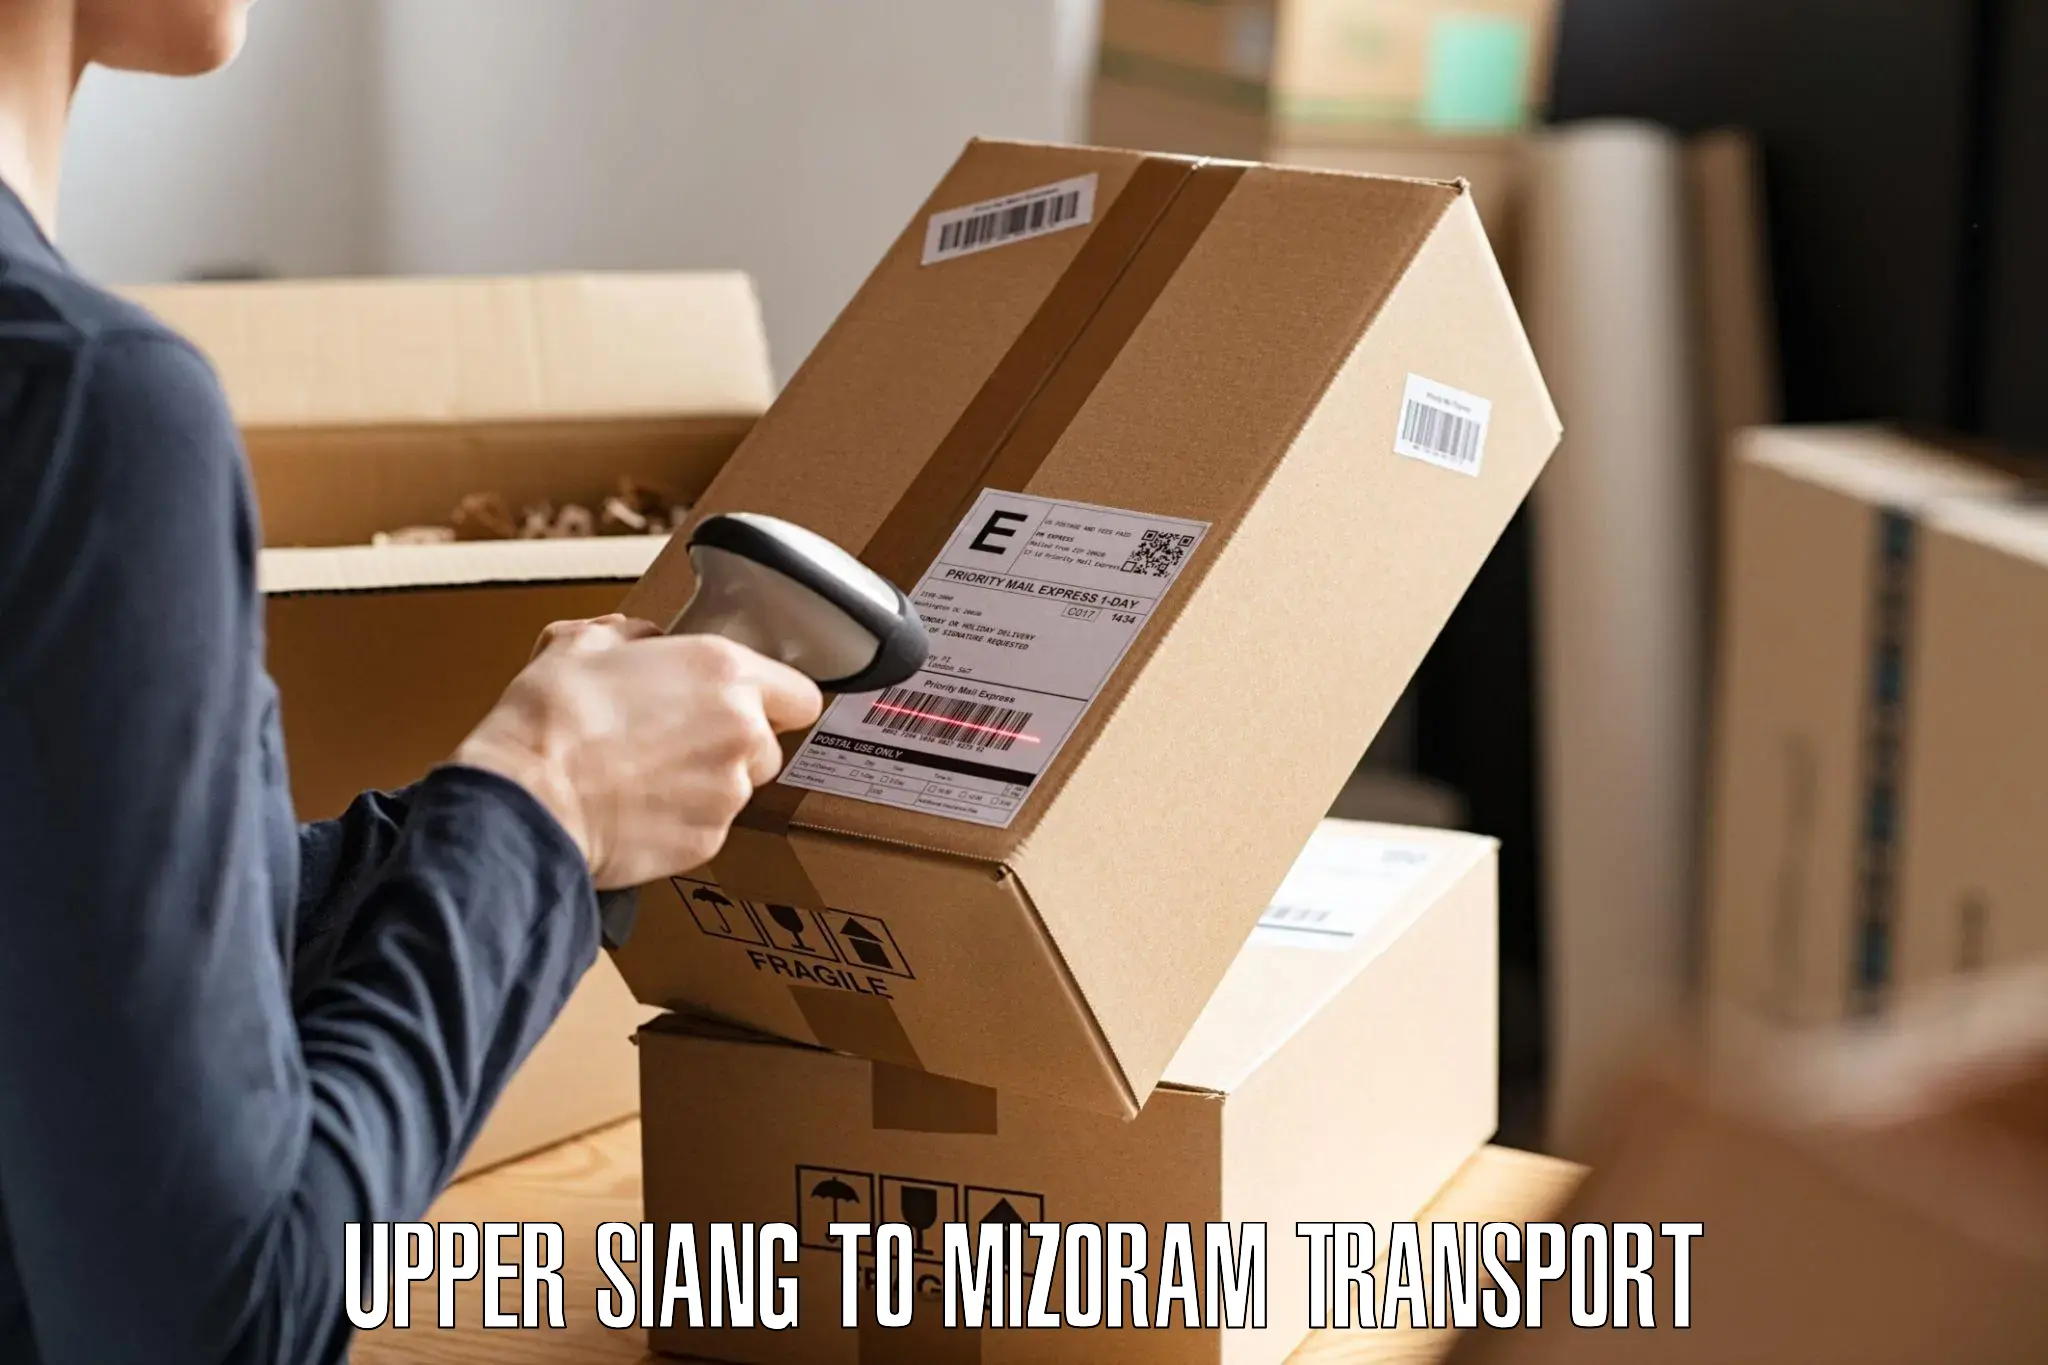 Road transport online services in Upper Siang to Mizoram